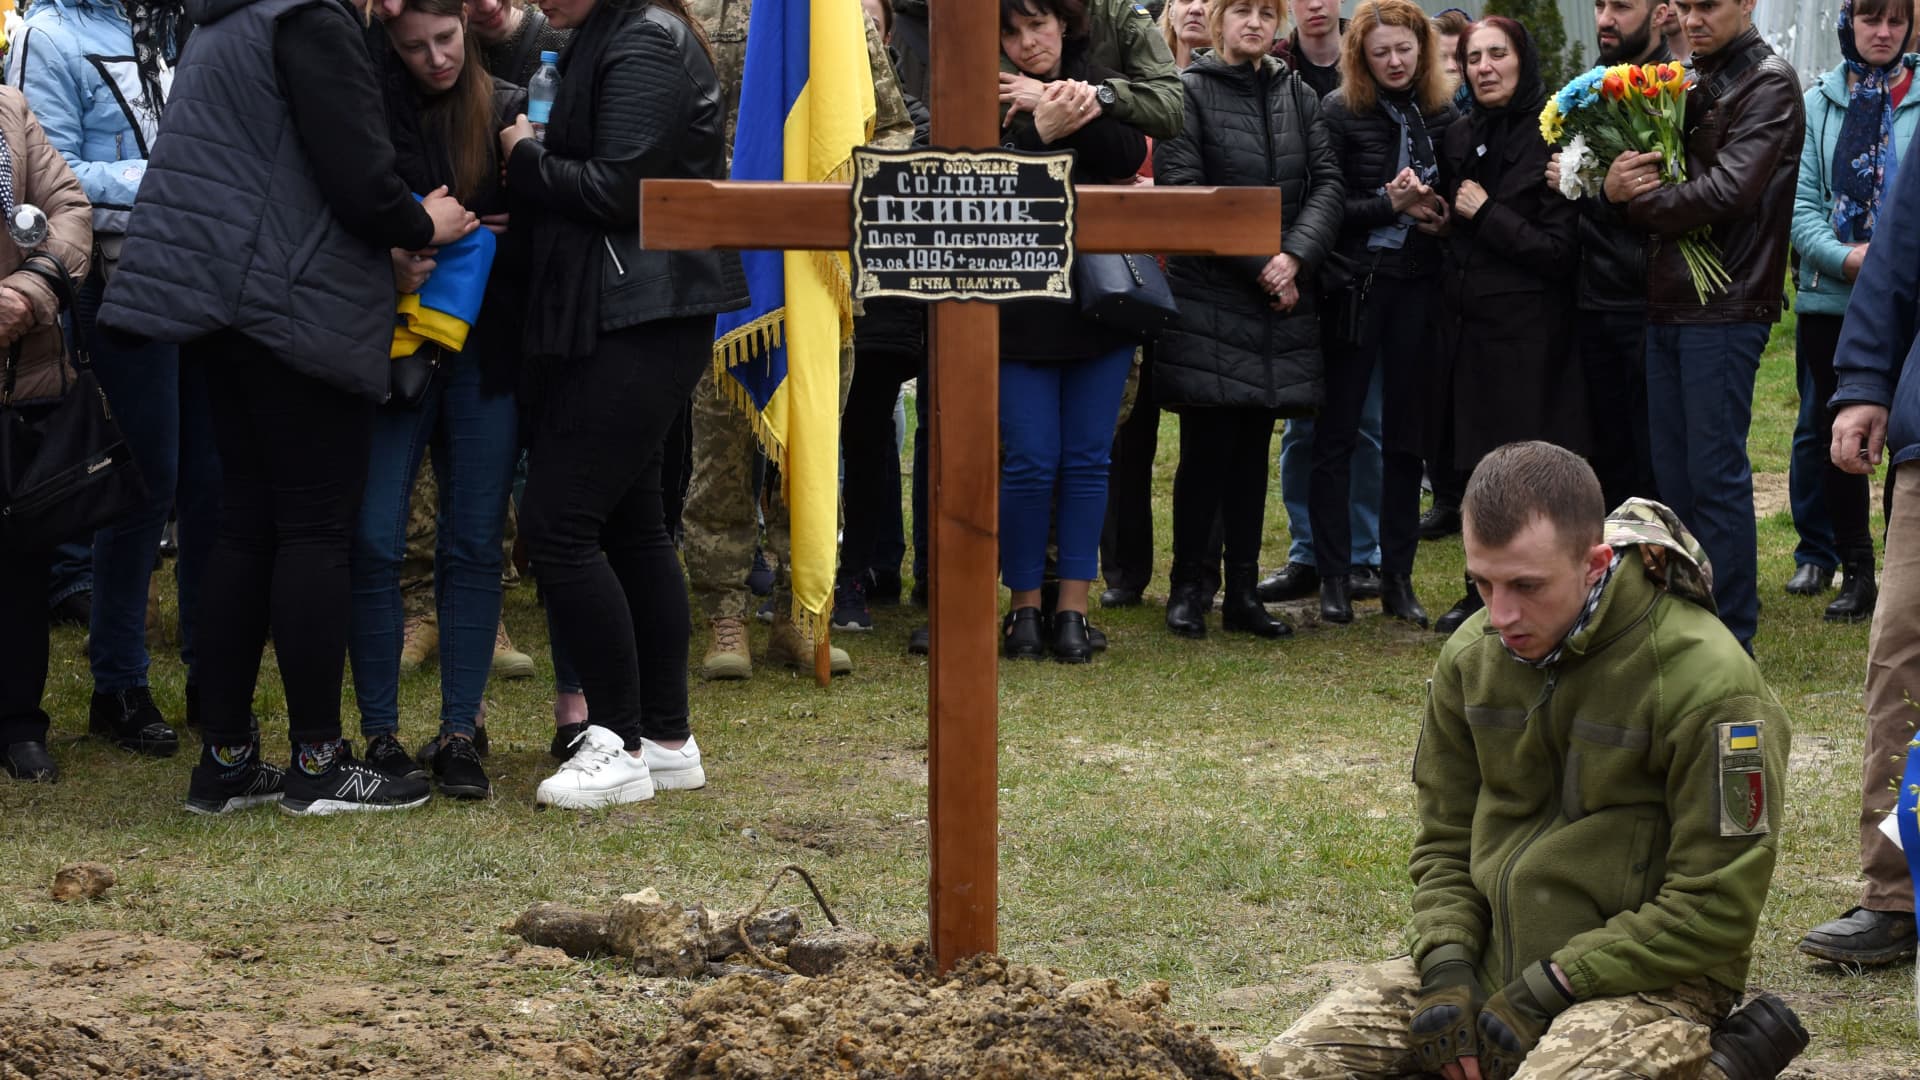 Relatives and friends attend the funeral of Ukrainian serviceman Oleh Skybyk, killed during Russia's invasion of Ukraine, at Lychakiv cemetery in the western Ukrainian city of Lviv on April 28, 2022.